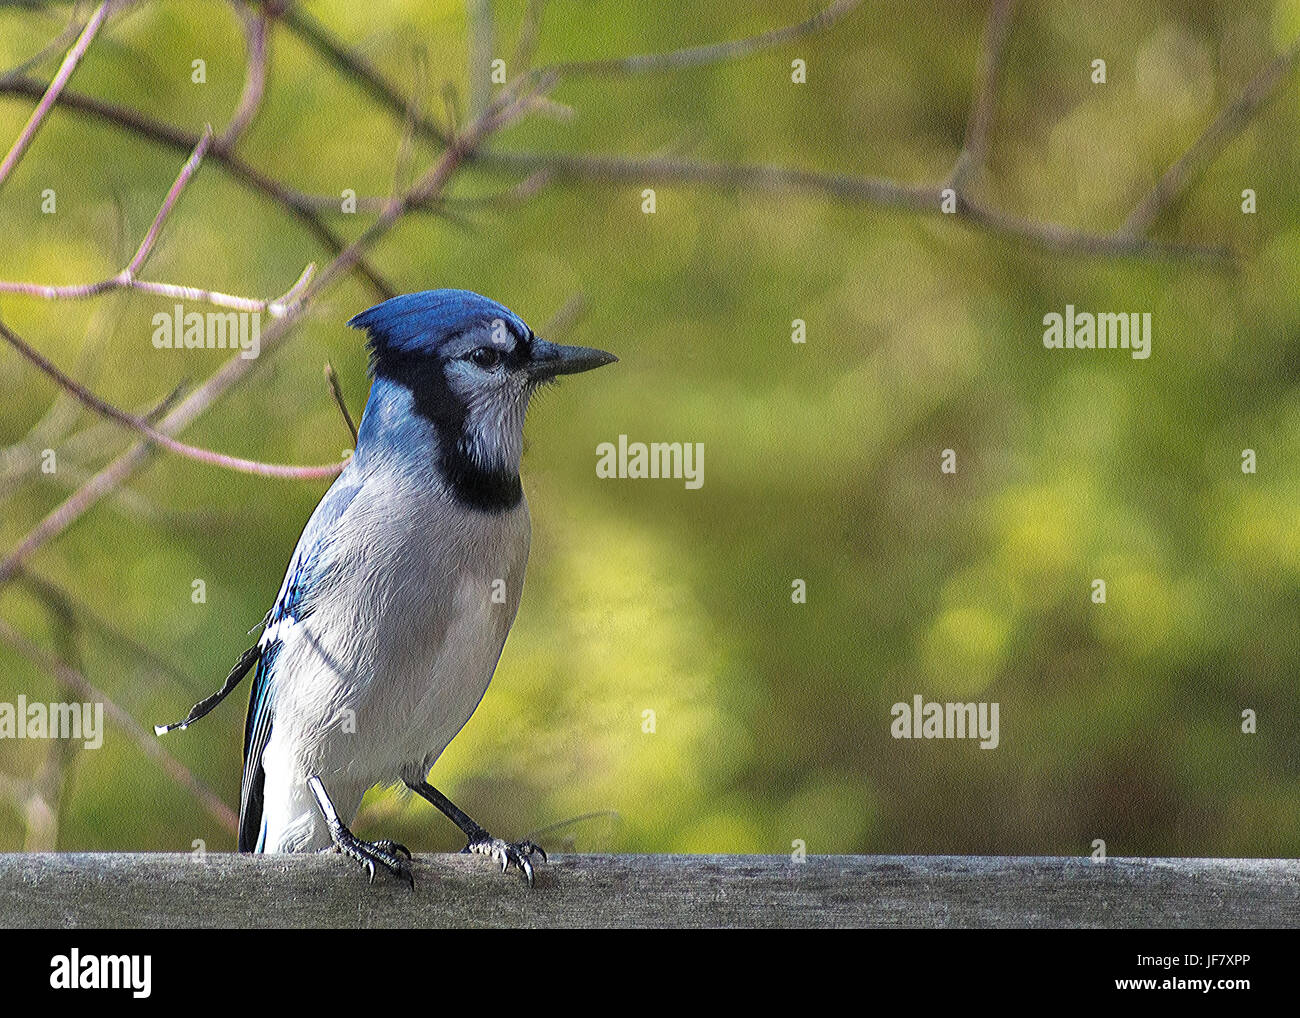 Bluejay perched on fence Stock Photo